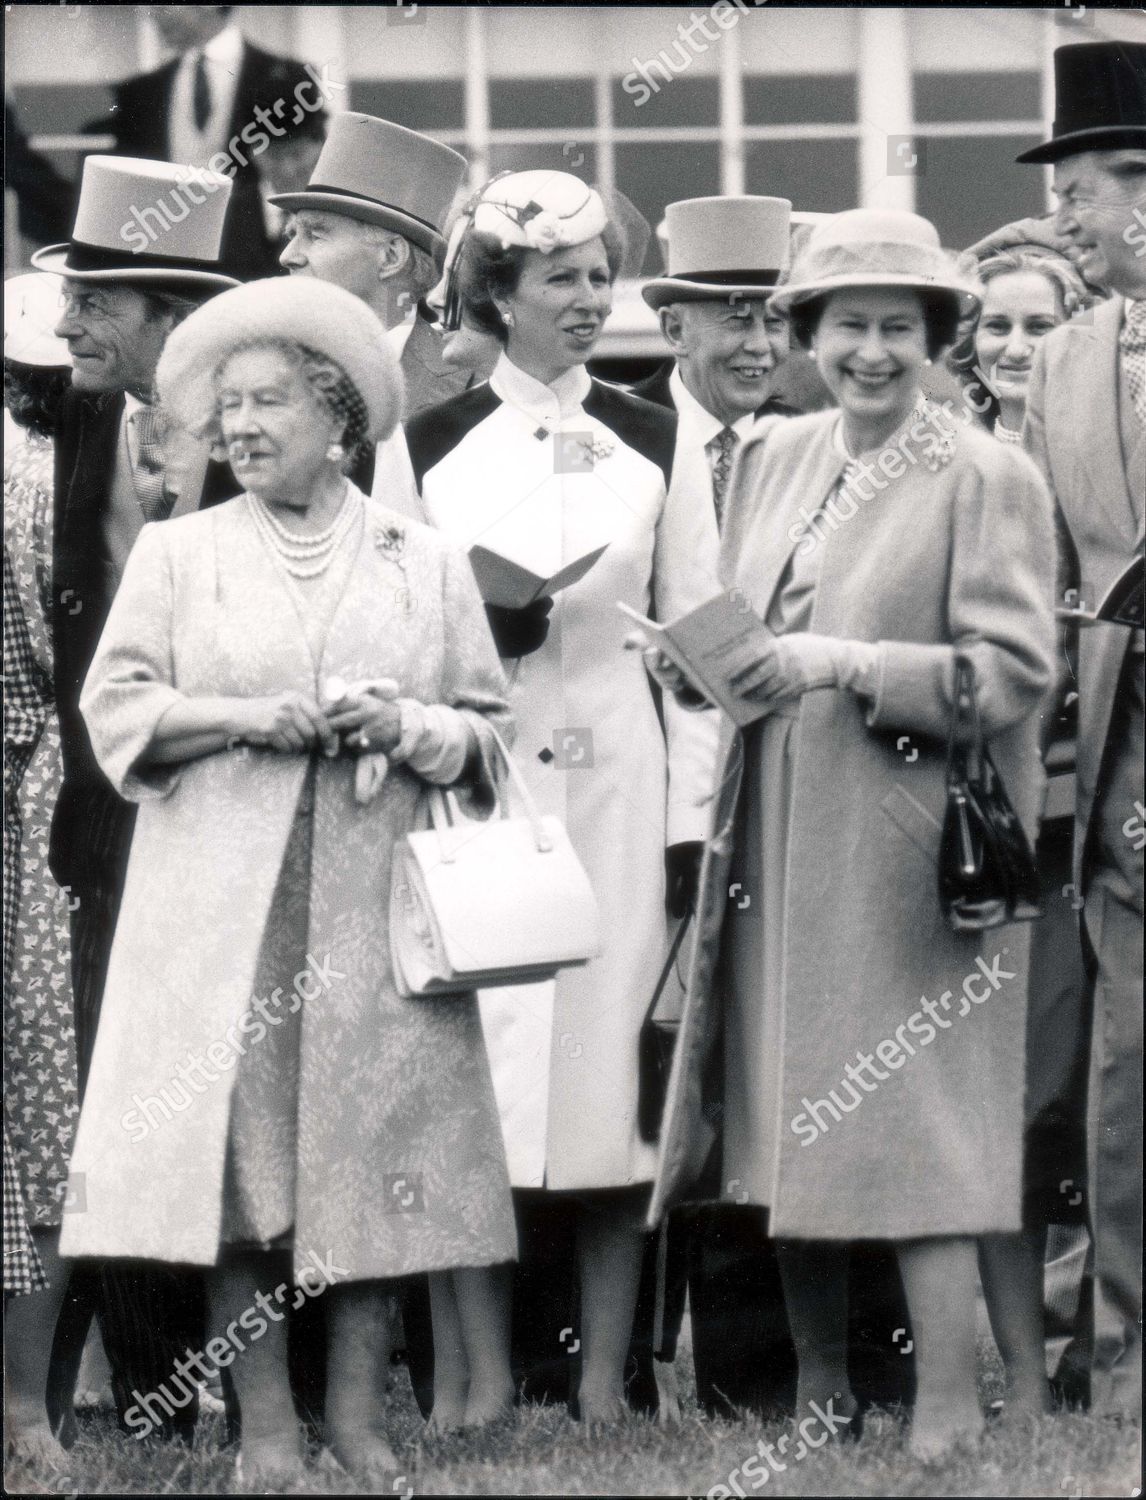 royal-family-racing-at-epsom-1985-the-royals-at-the-derby-princess-anne-middle-the-queen-r-and-queen-mother-dead-3-2002-shutterstock-editorial-1035844a.jpg